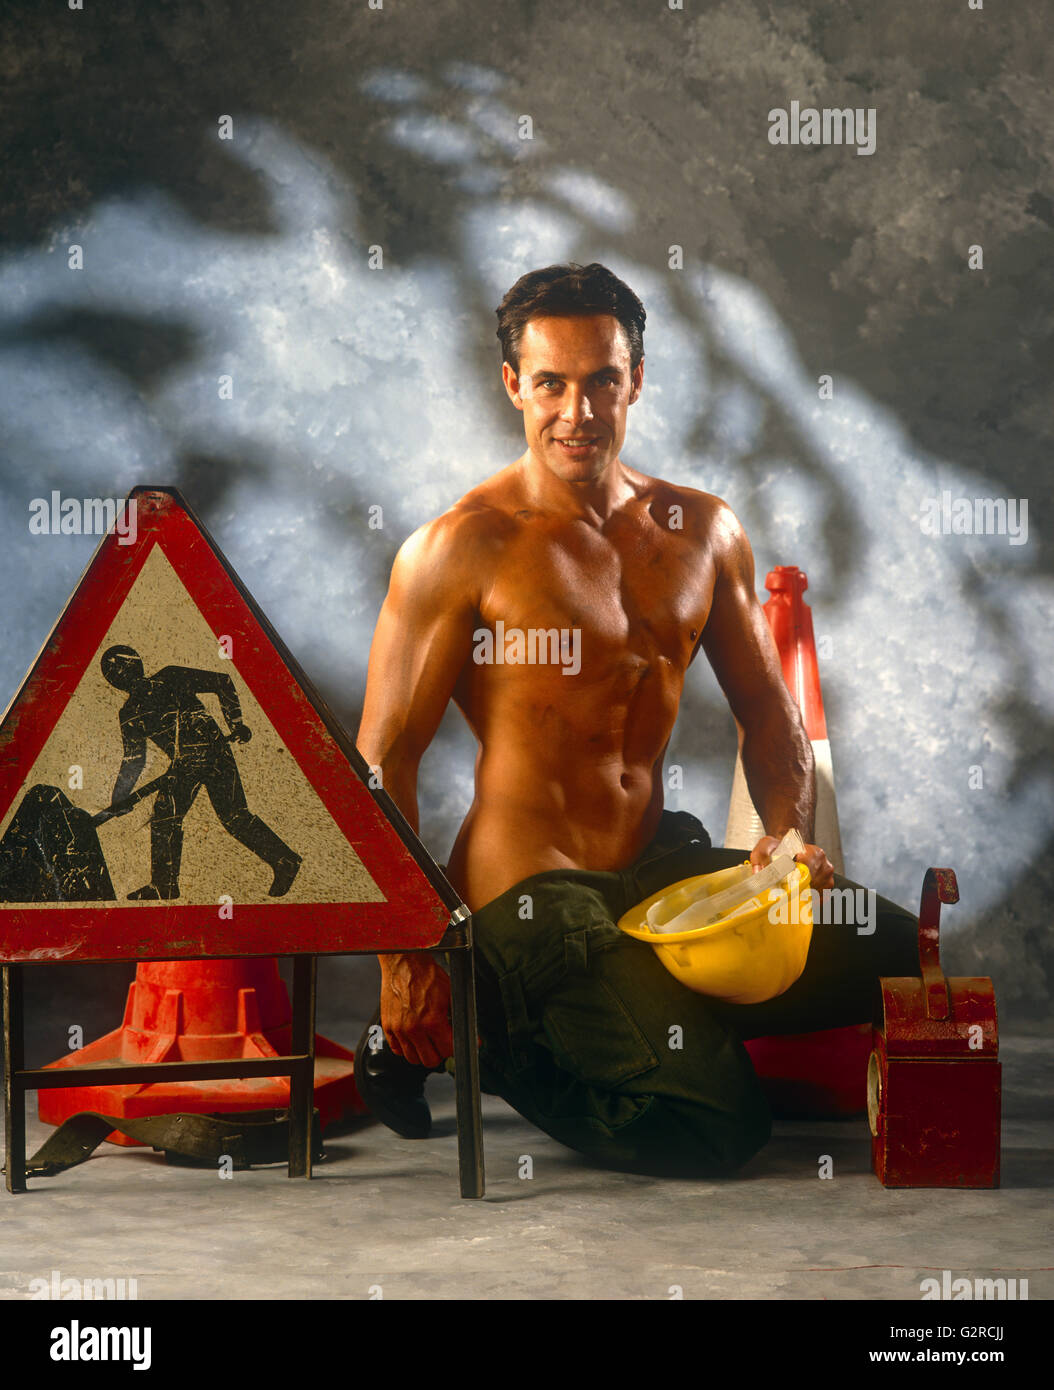 A man dressed up as a road worker Stock Photo